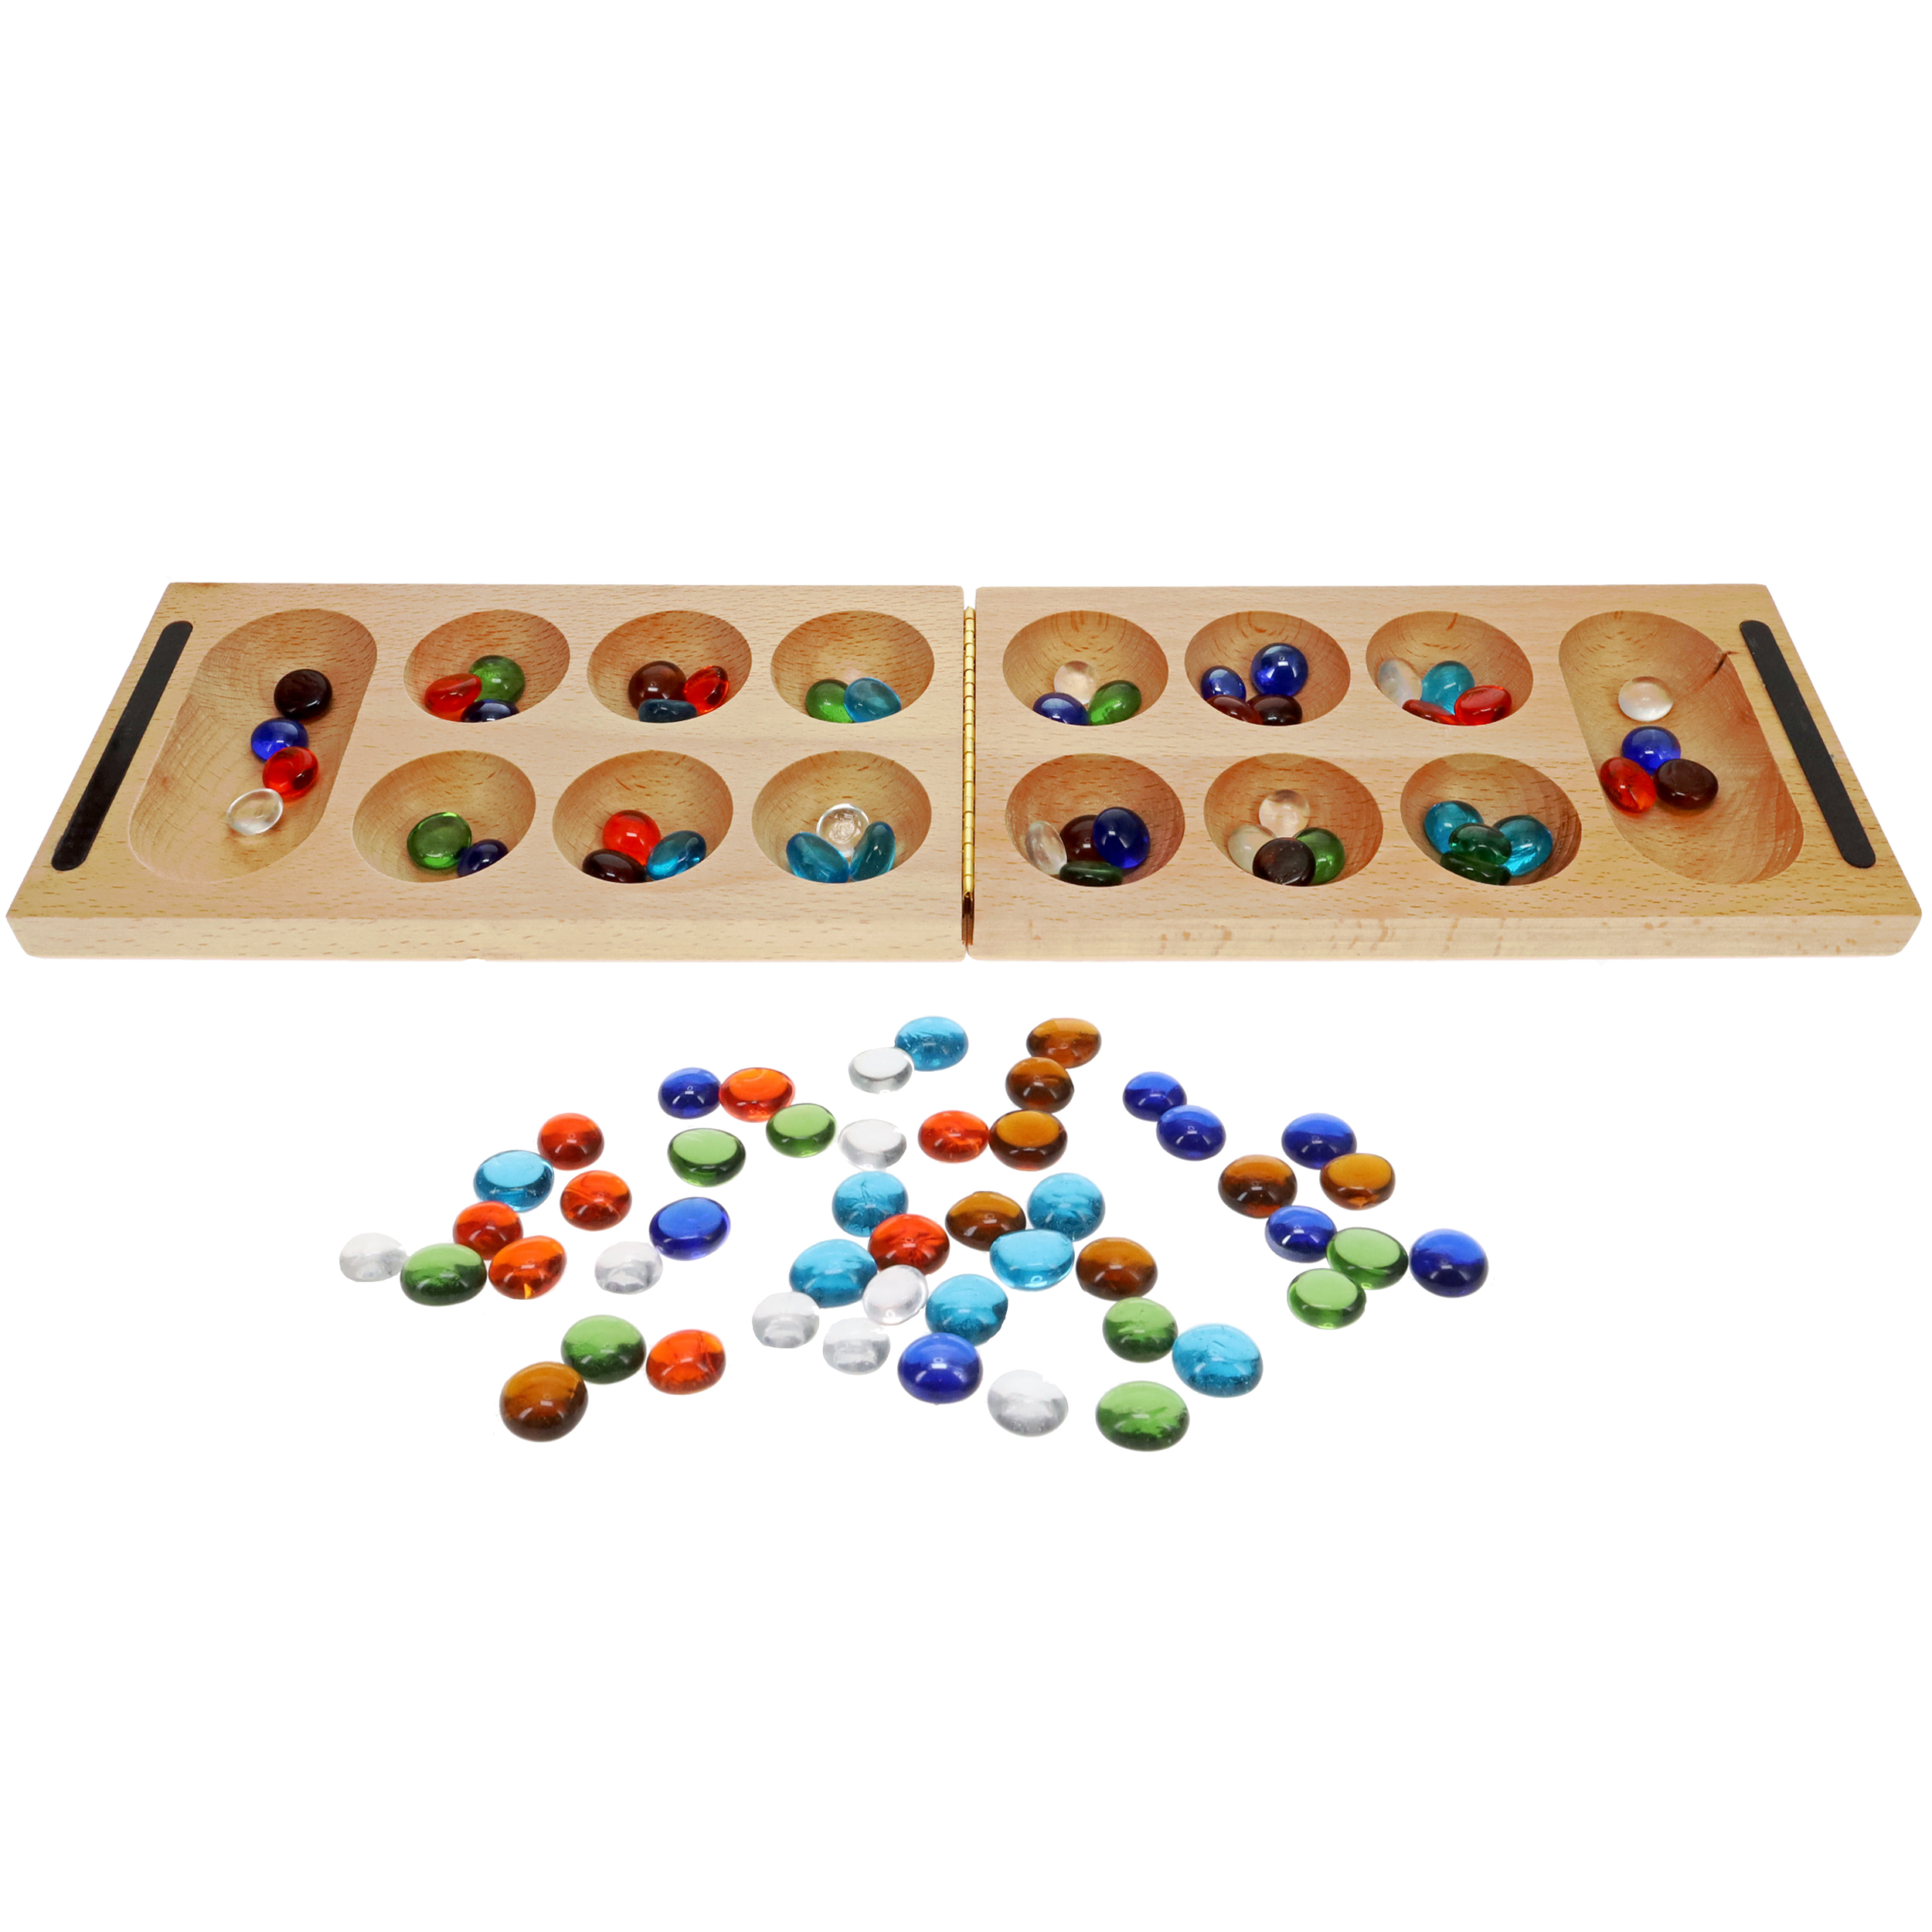 RNK Gaming Mancala Board Game with Folding Wooden Board and Colorful Glass Beads